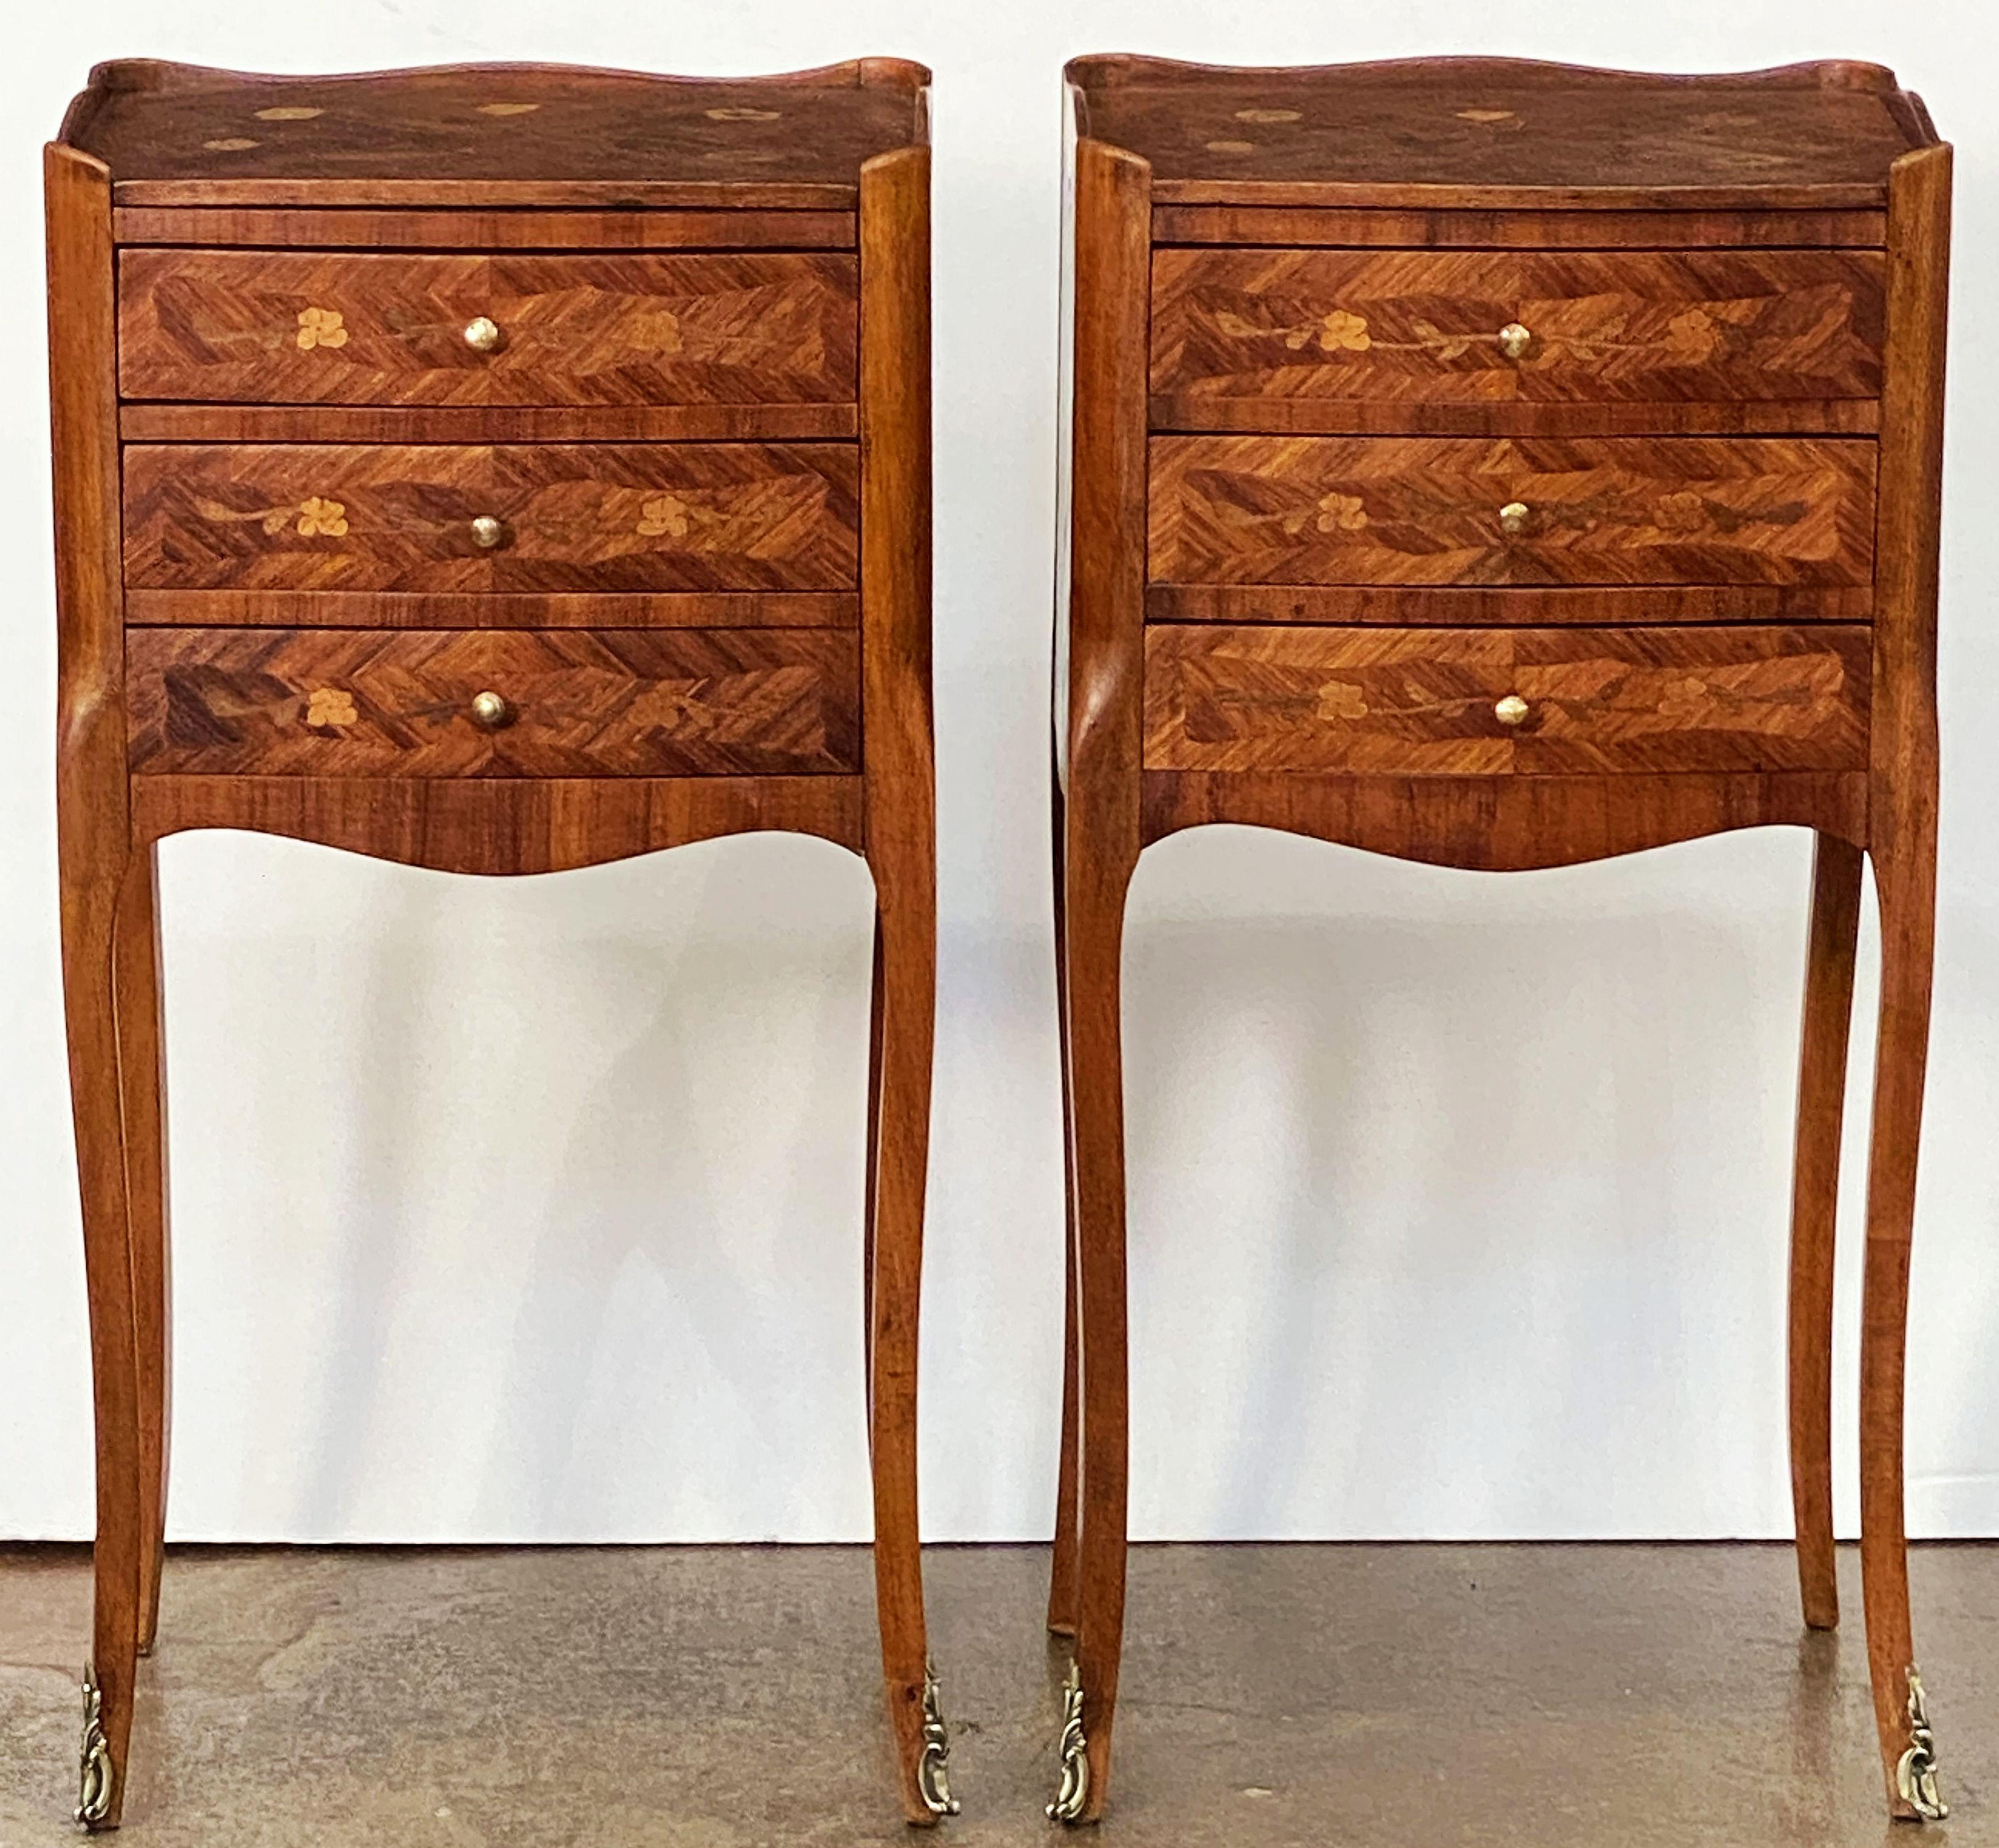 Inlay Pair of French Inlaid Bedside Tables or Nightstands on Cabriole Legs